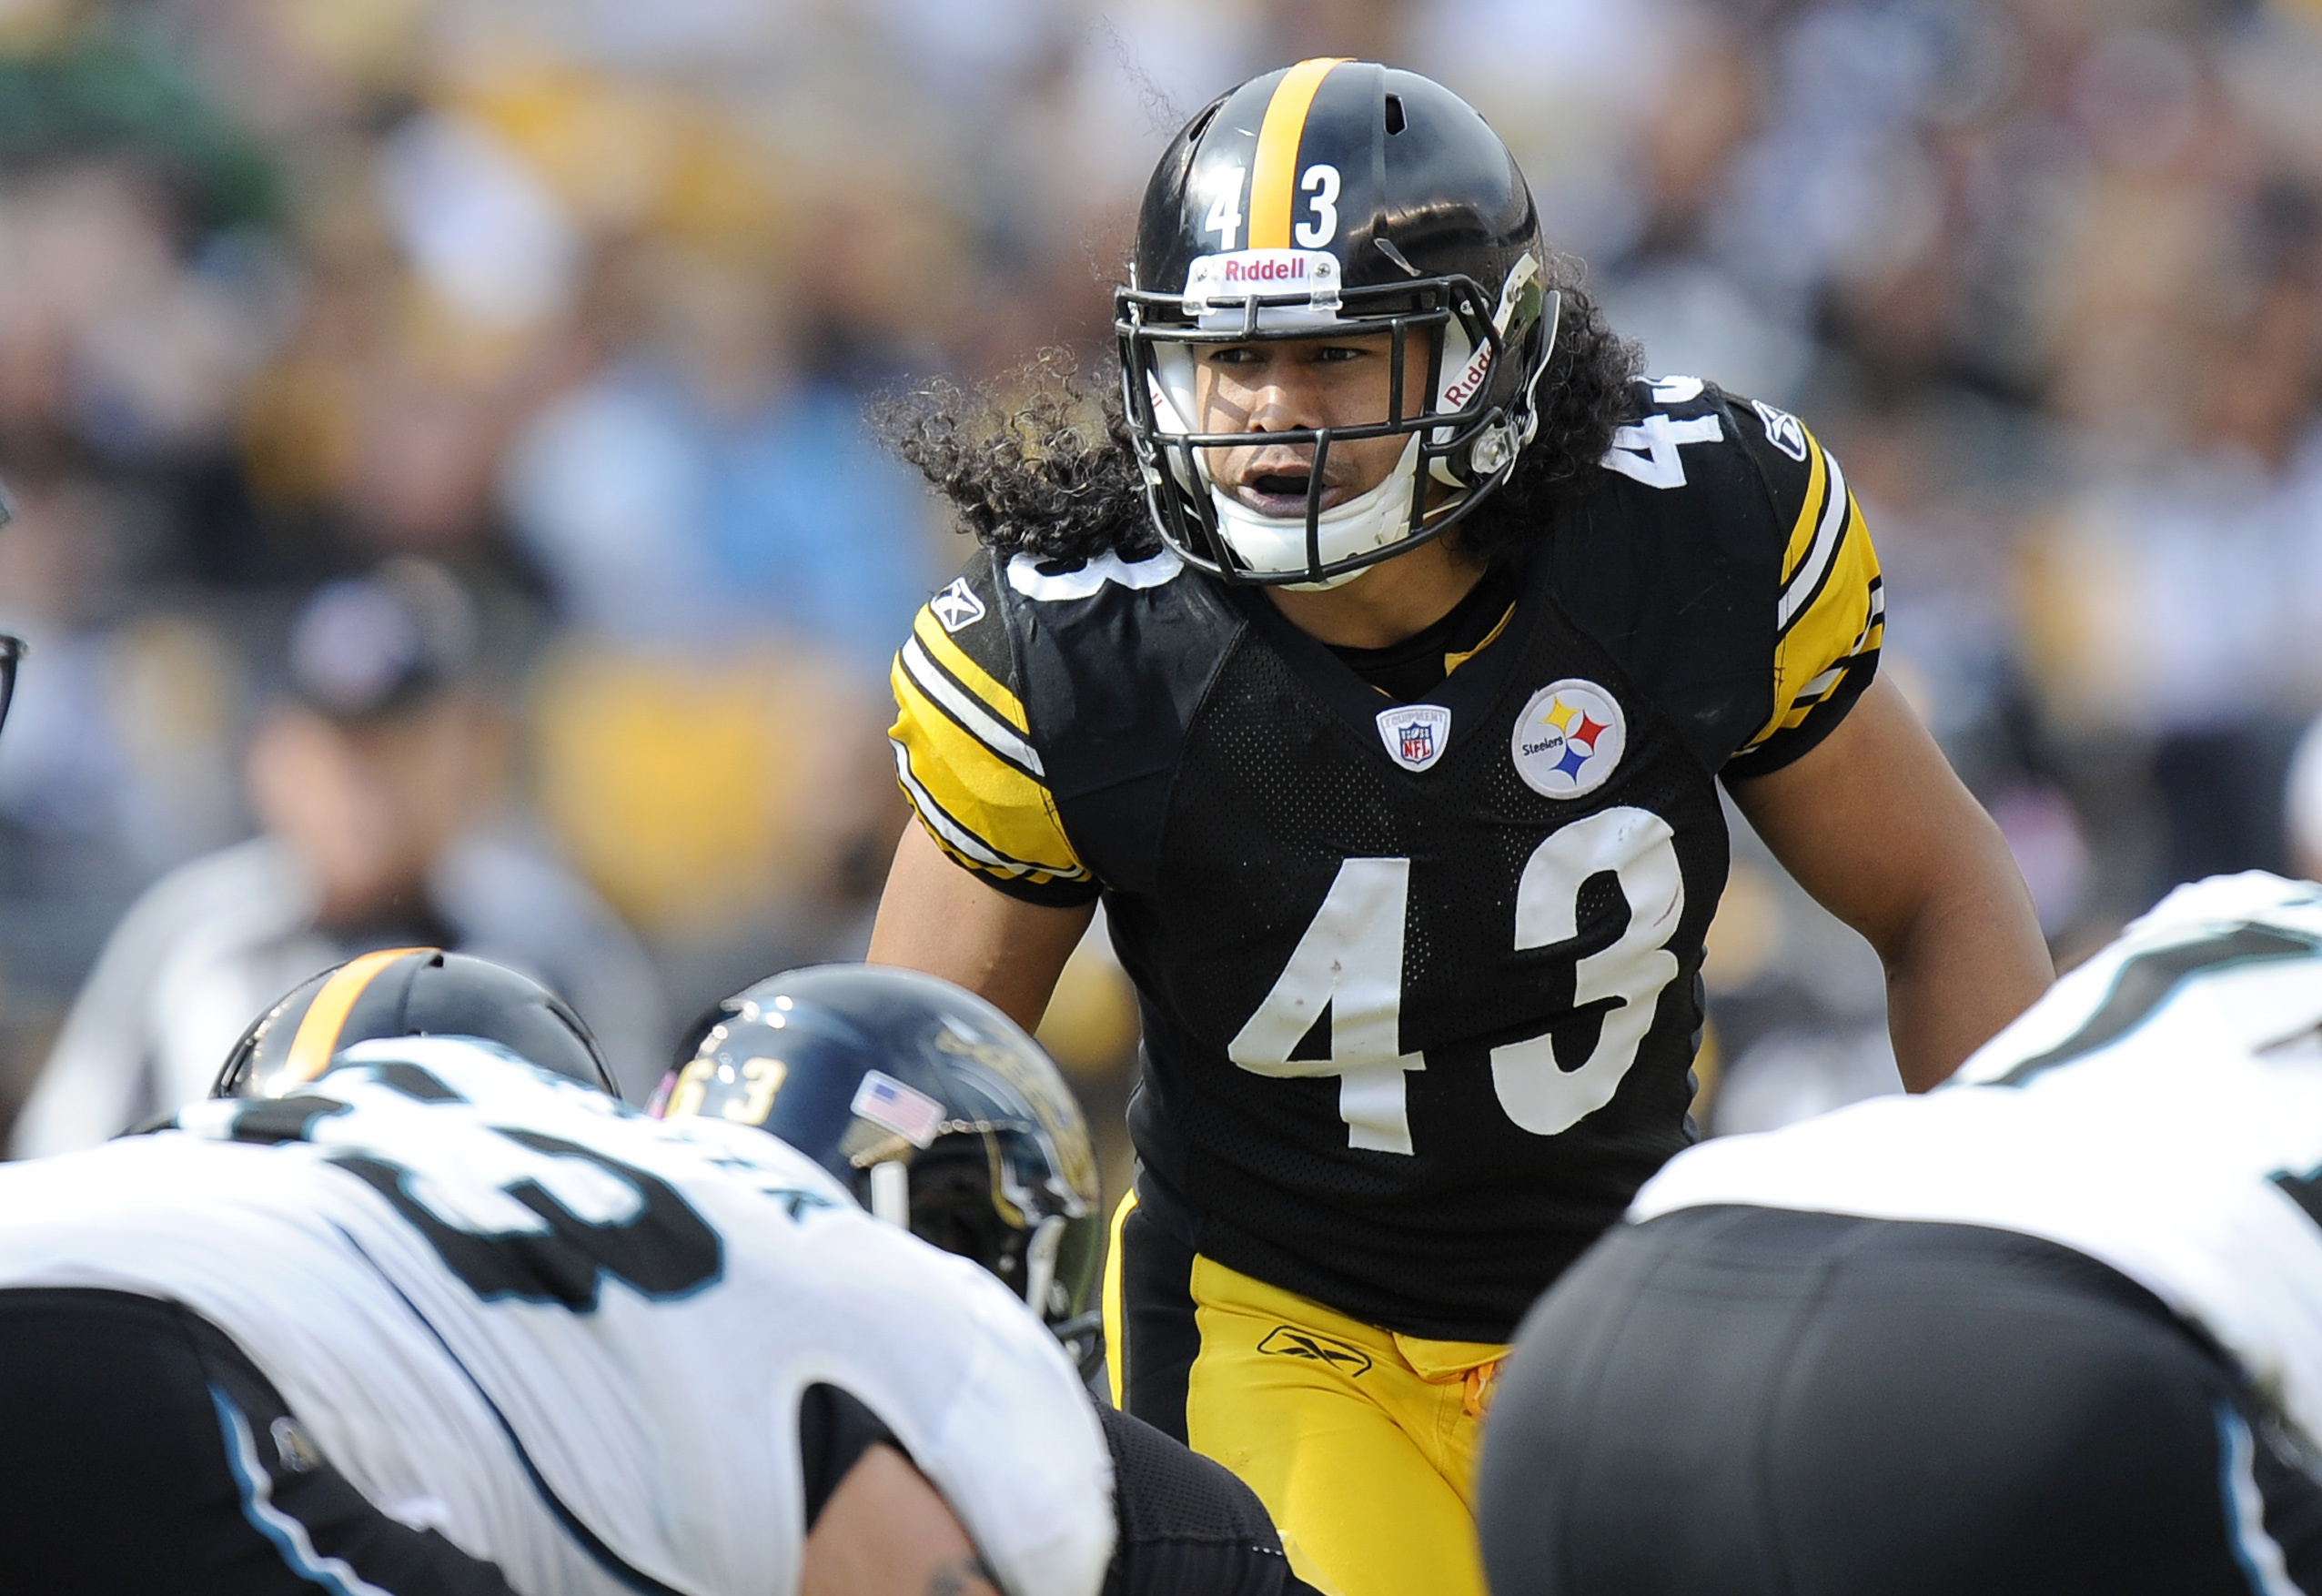 Steelers safety Troy Polamalu retires | The Spokesman-Review